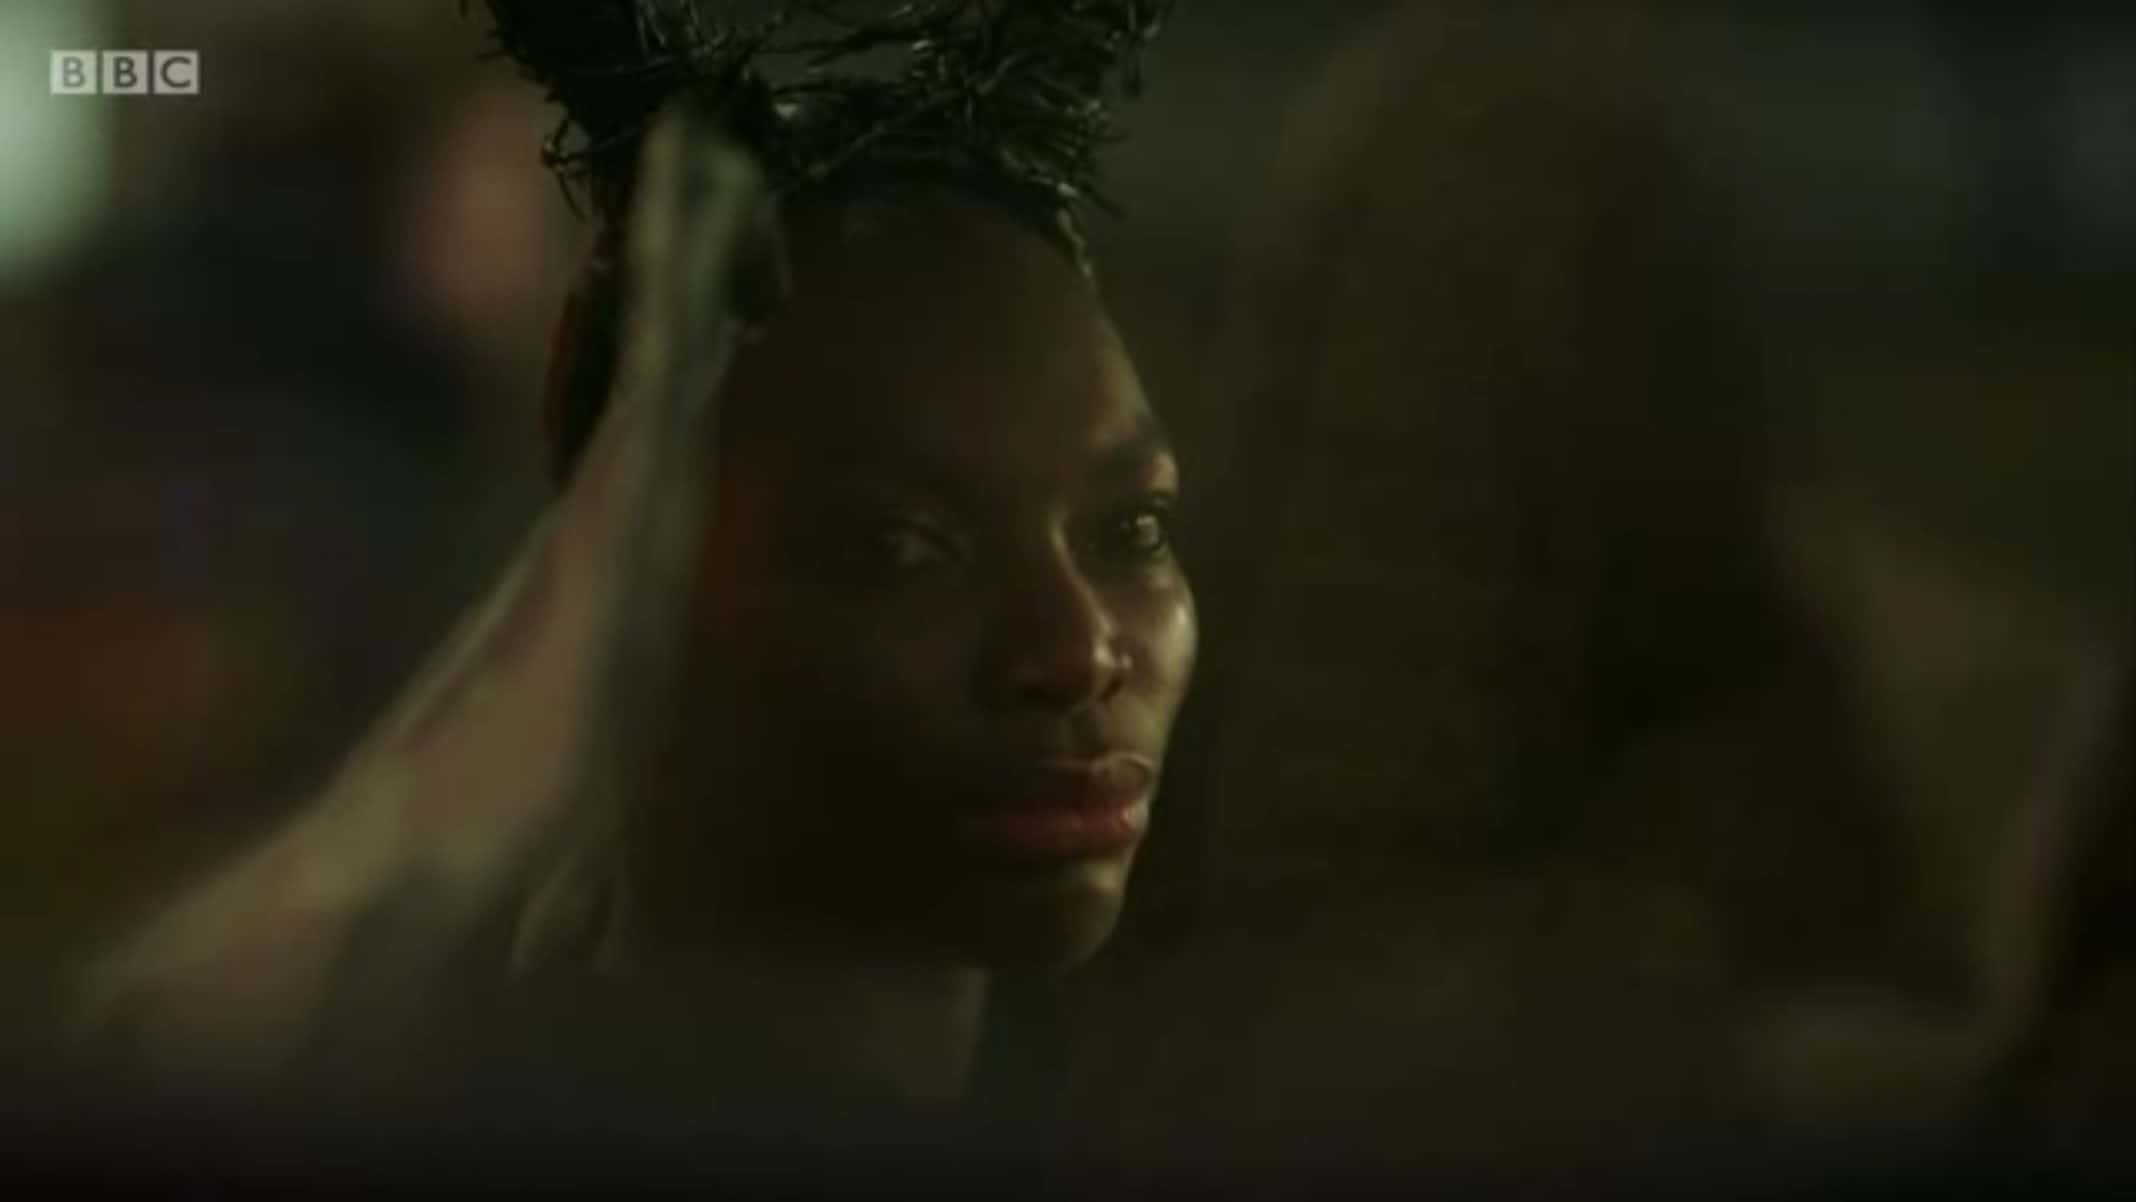 Arabella (Michaela Coel) looking into "Ego Death" from the outside.